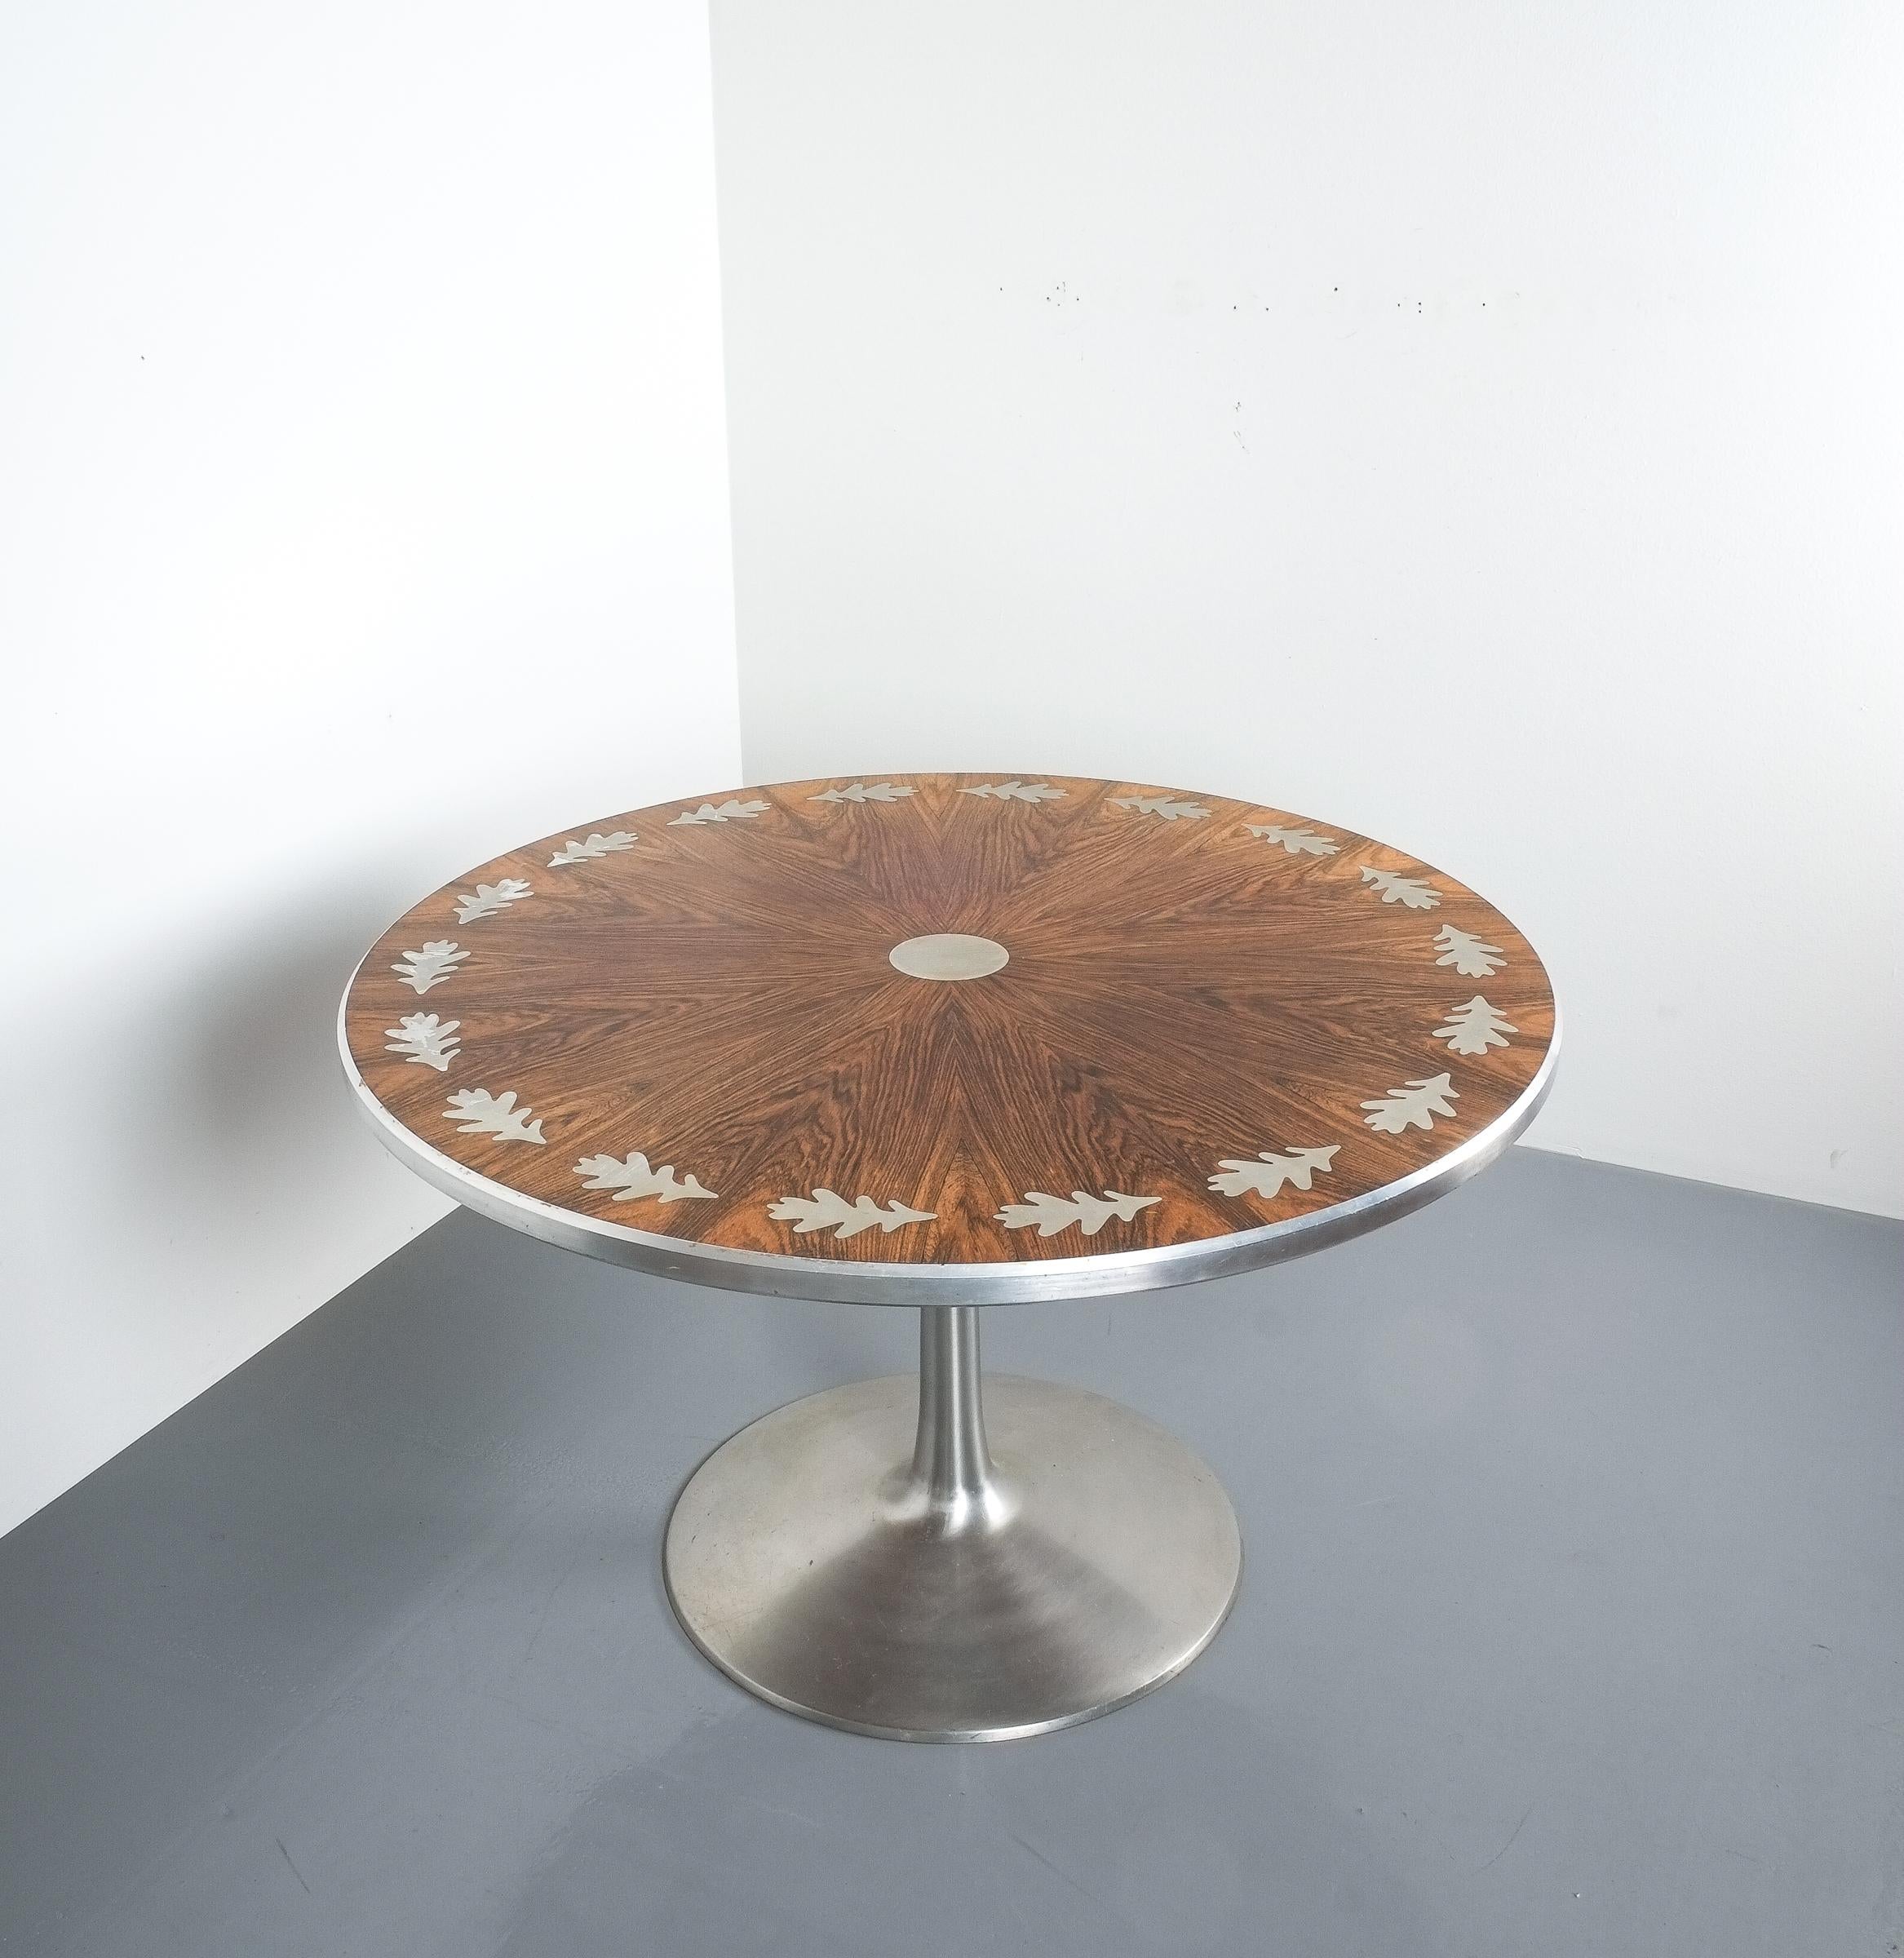 Breakfast or dining table by Steen Ostergaard for Poul Cadovius. Very elegant rosewood and aluminum table manufactured by France and Sons in the 1960s. It's in good condition featuring an aluminum table base and white rosewood aluminum oak-leaf